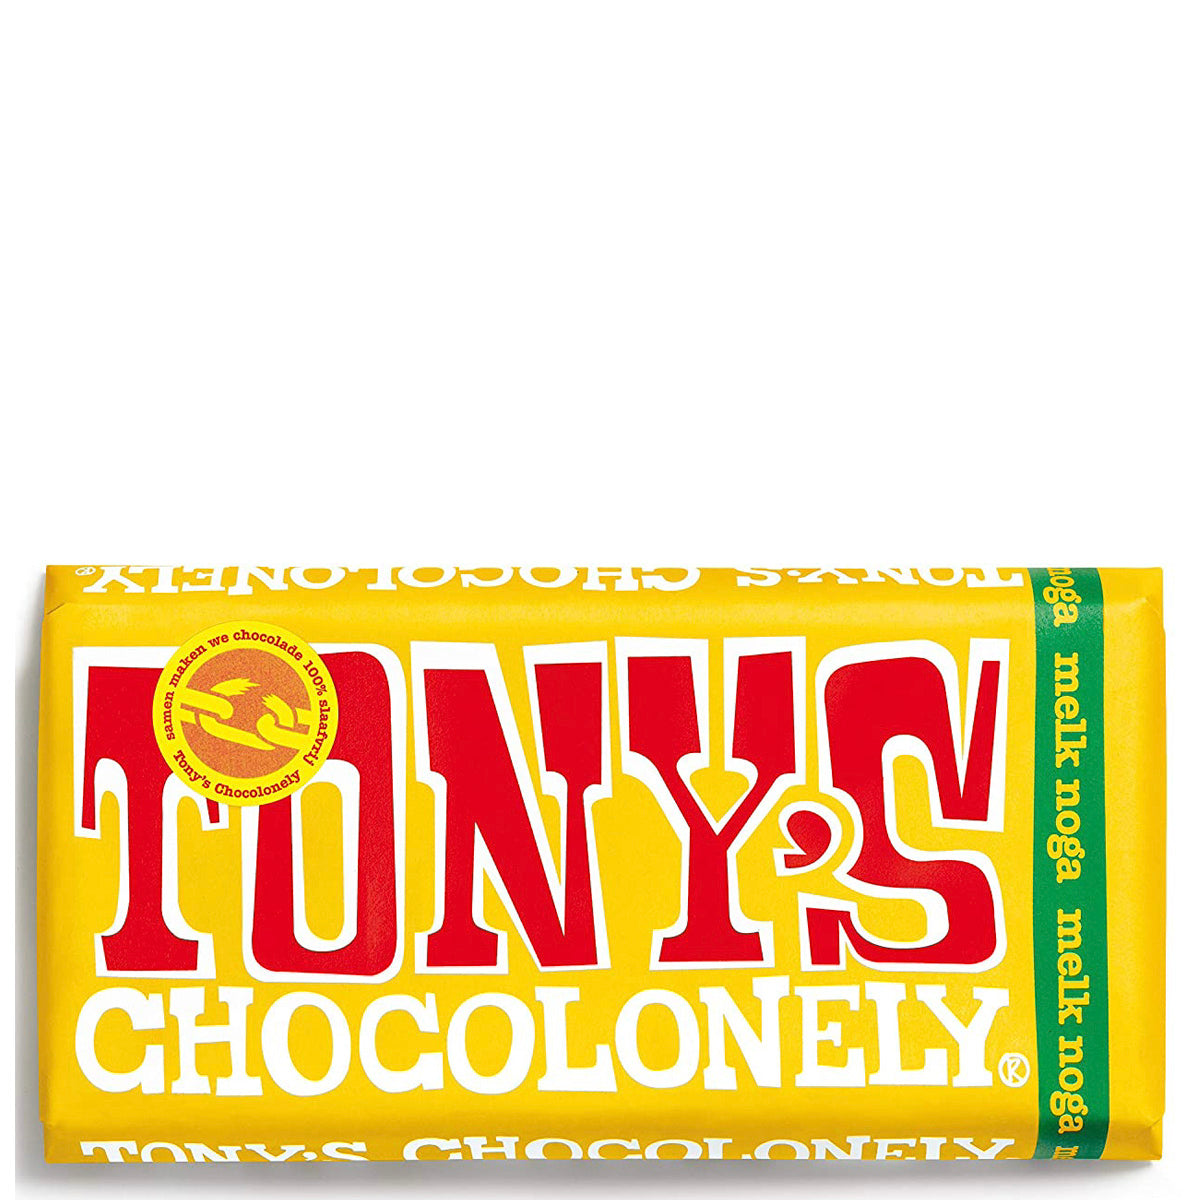 Tony's Chocolonely Milk Chocolate with Nougat